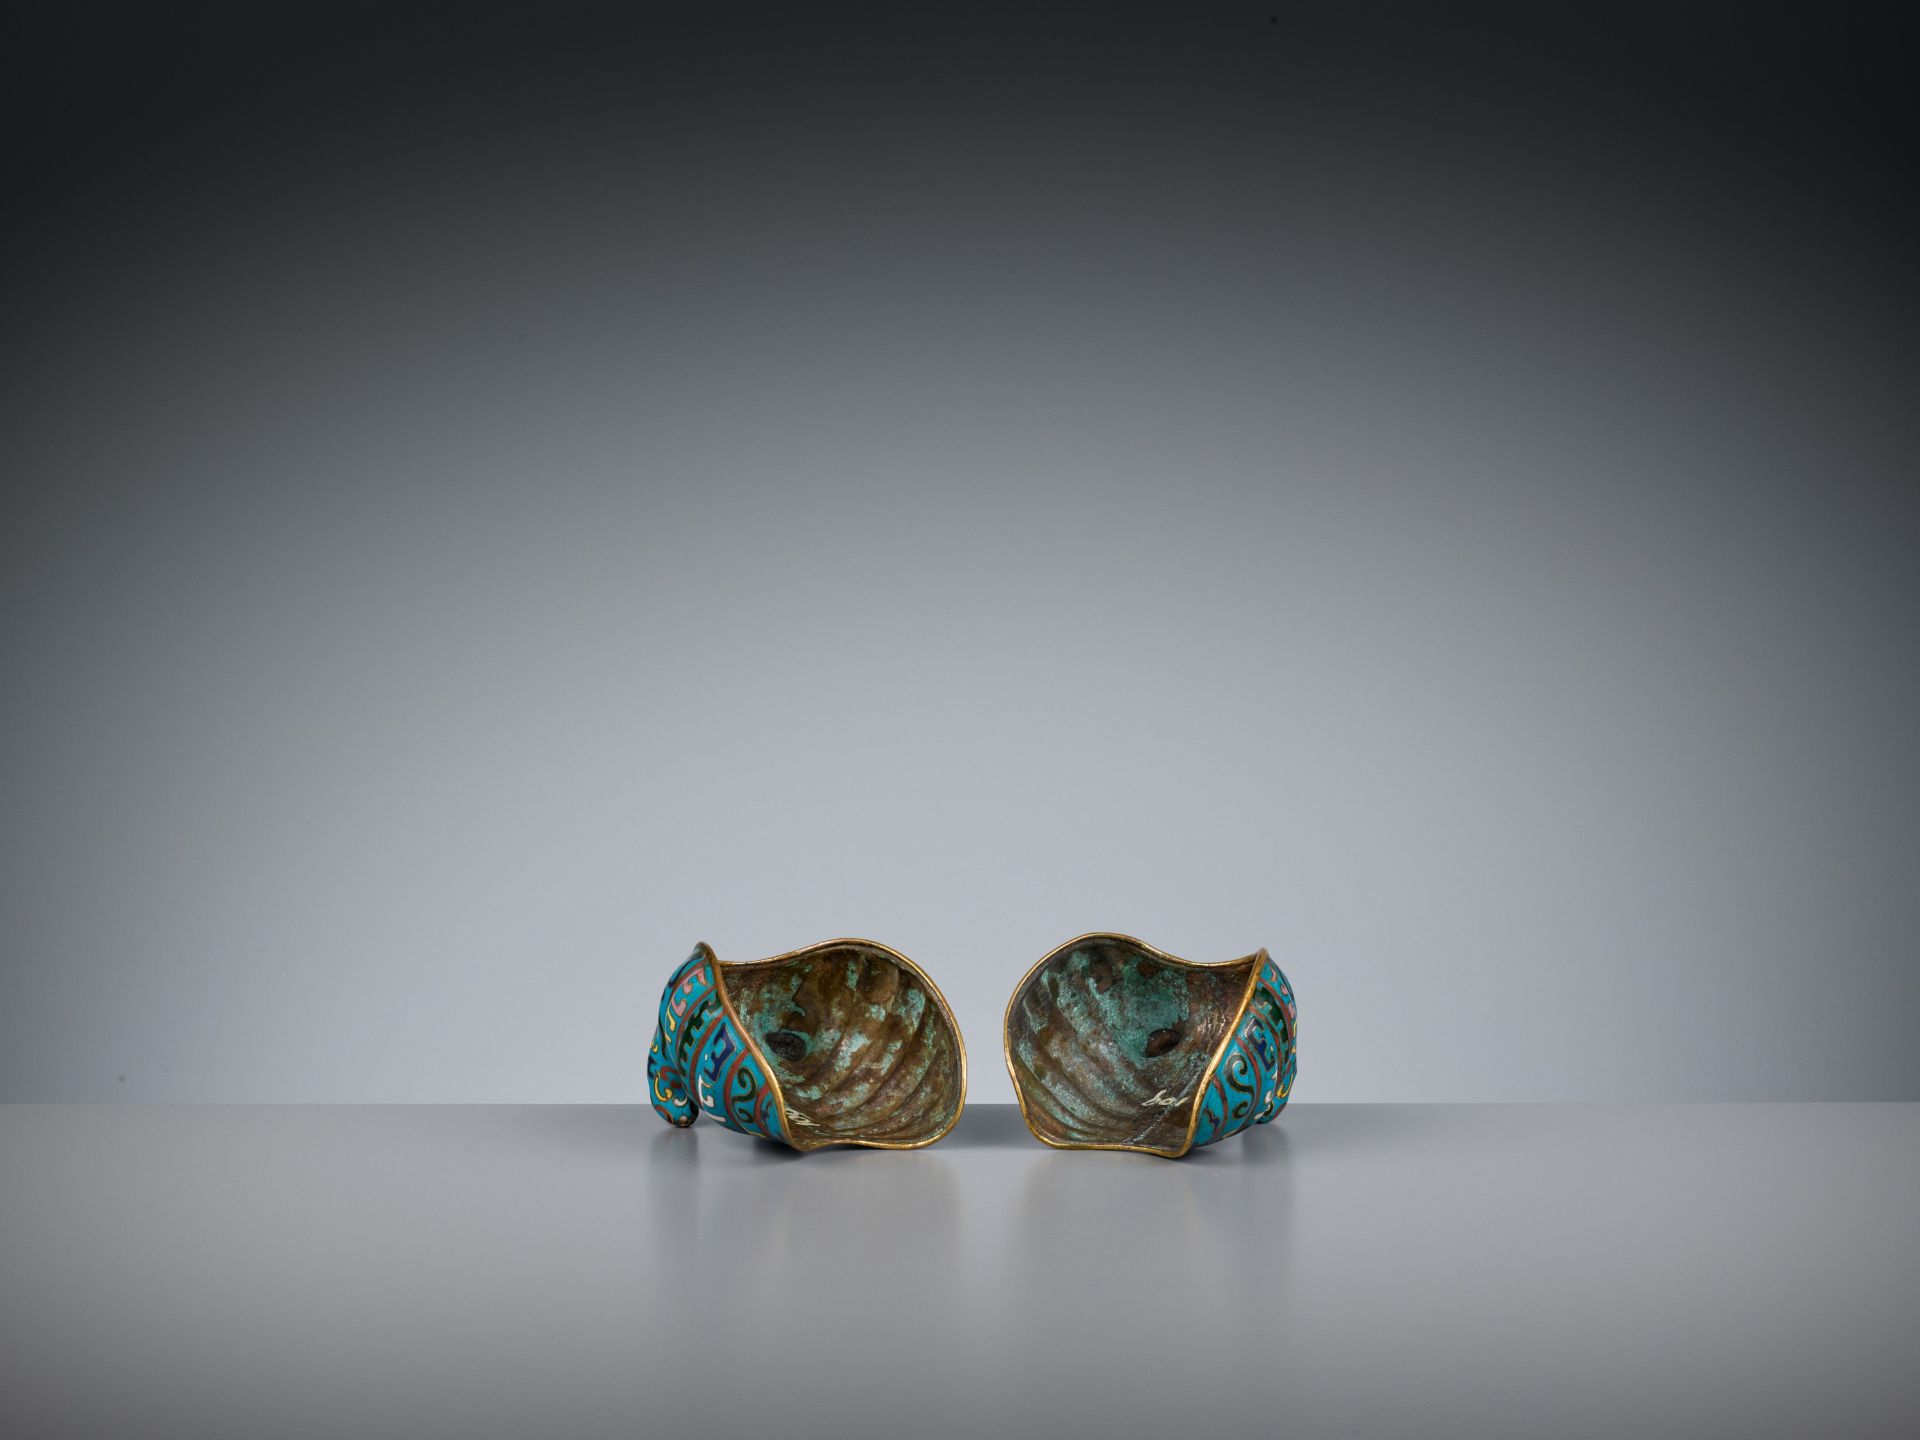 A PAIR OF GILT-BRONZE CLOISONNE ENAMEL 'DUCK' CENSER AND COVERS, LATE QING DYNASTY - Image 9 of 11